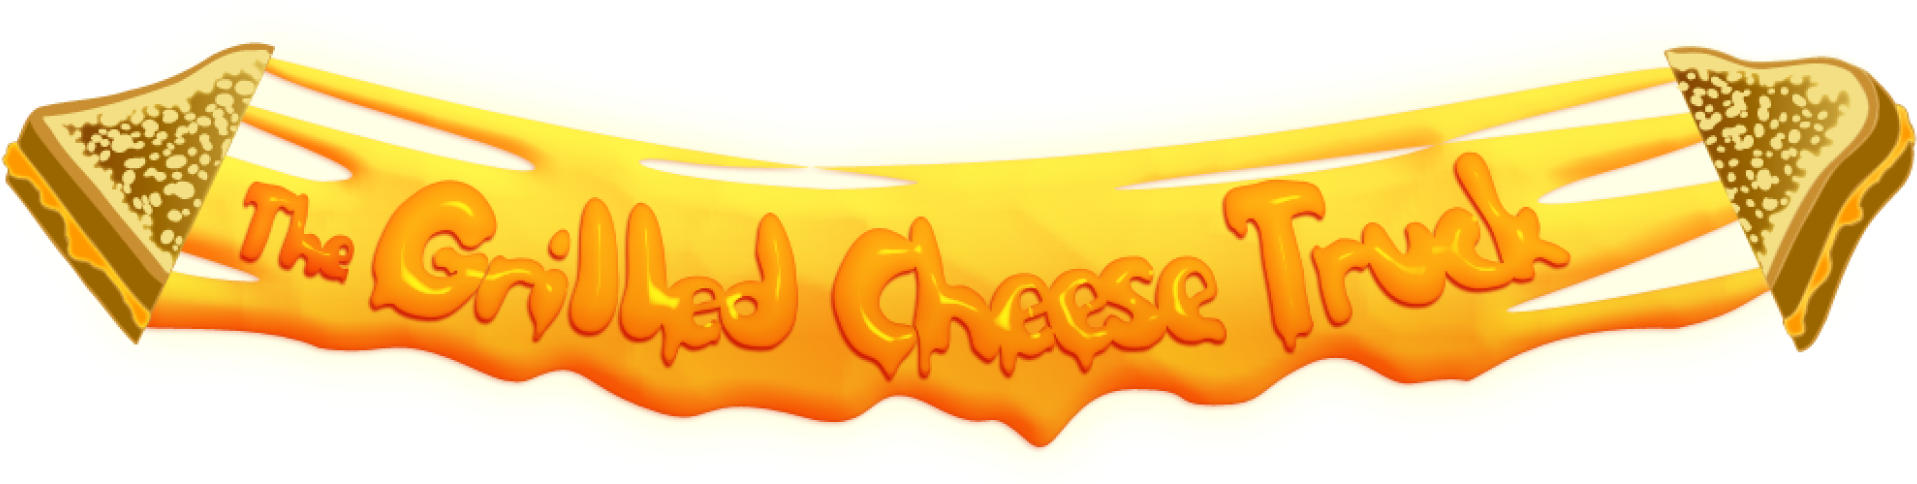 The Grilled Cheese Truck Food Truck - Grilled Cheese Truck Logo (1938x500)